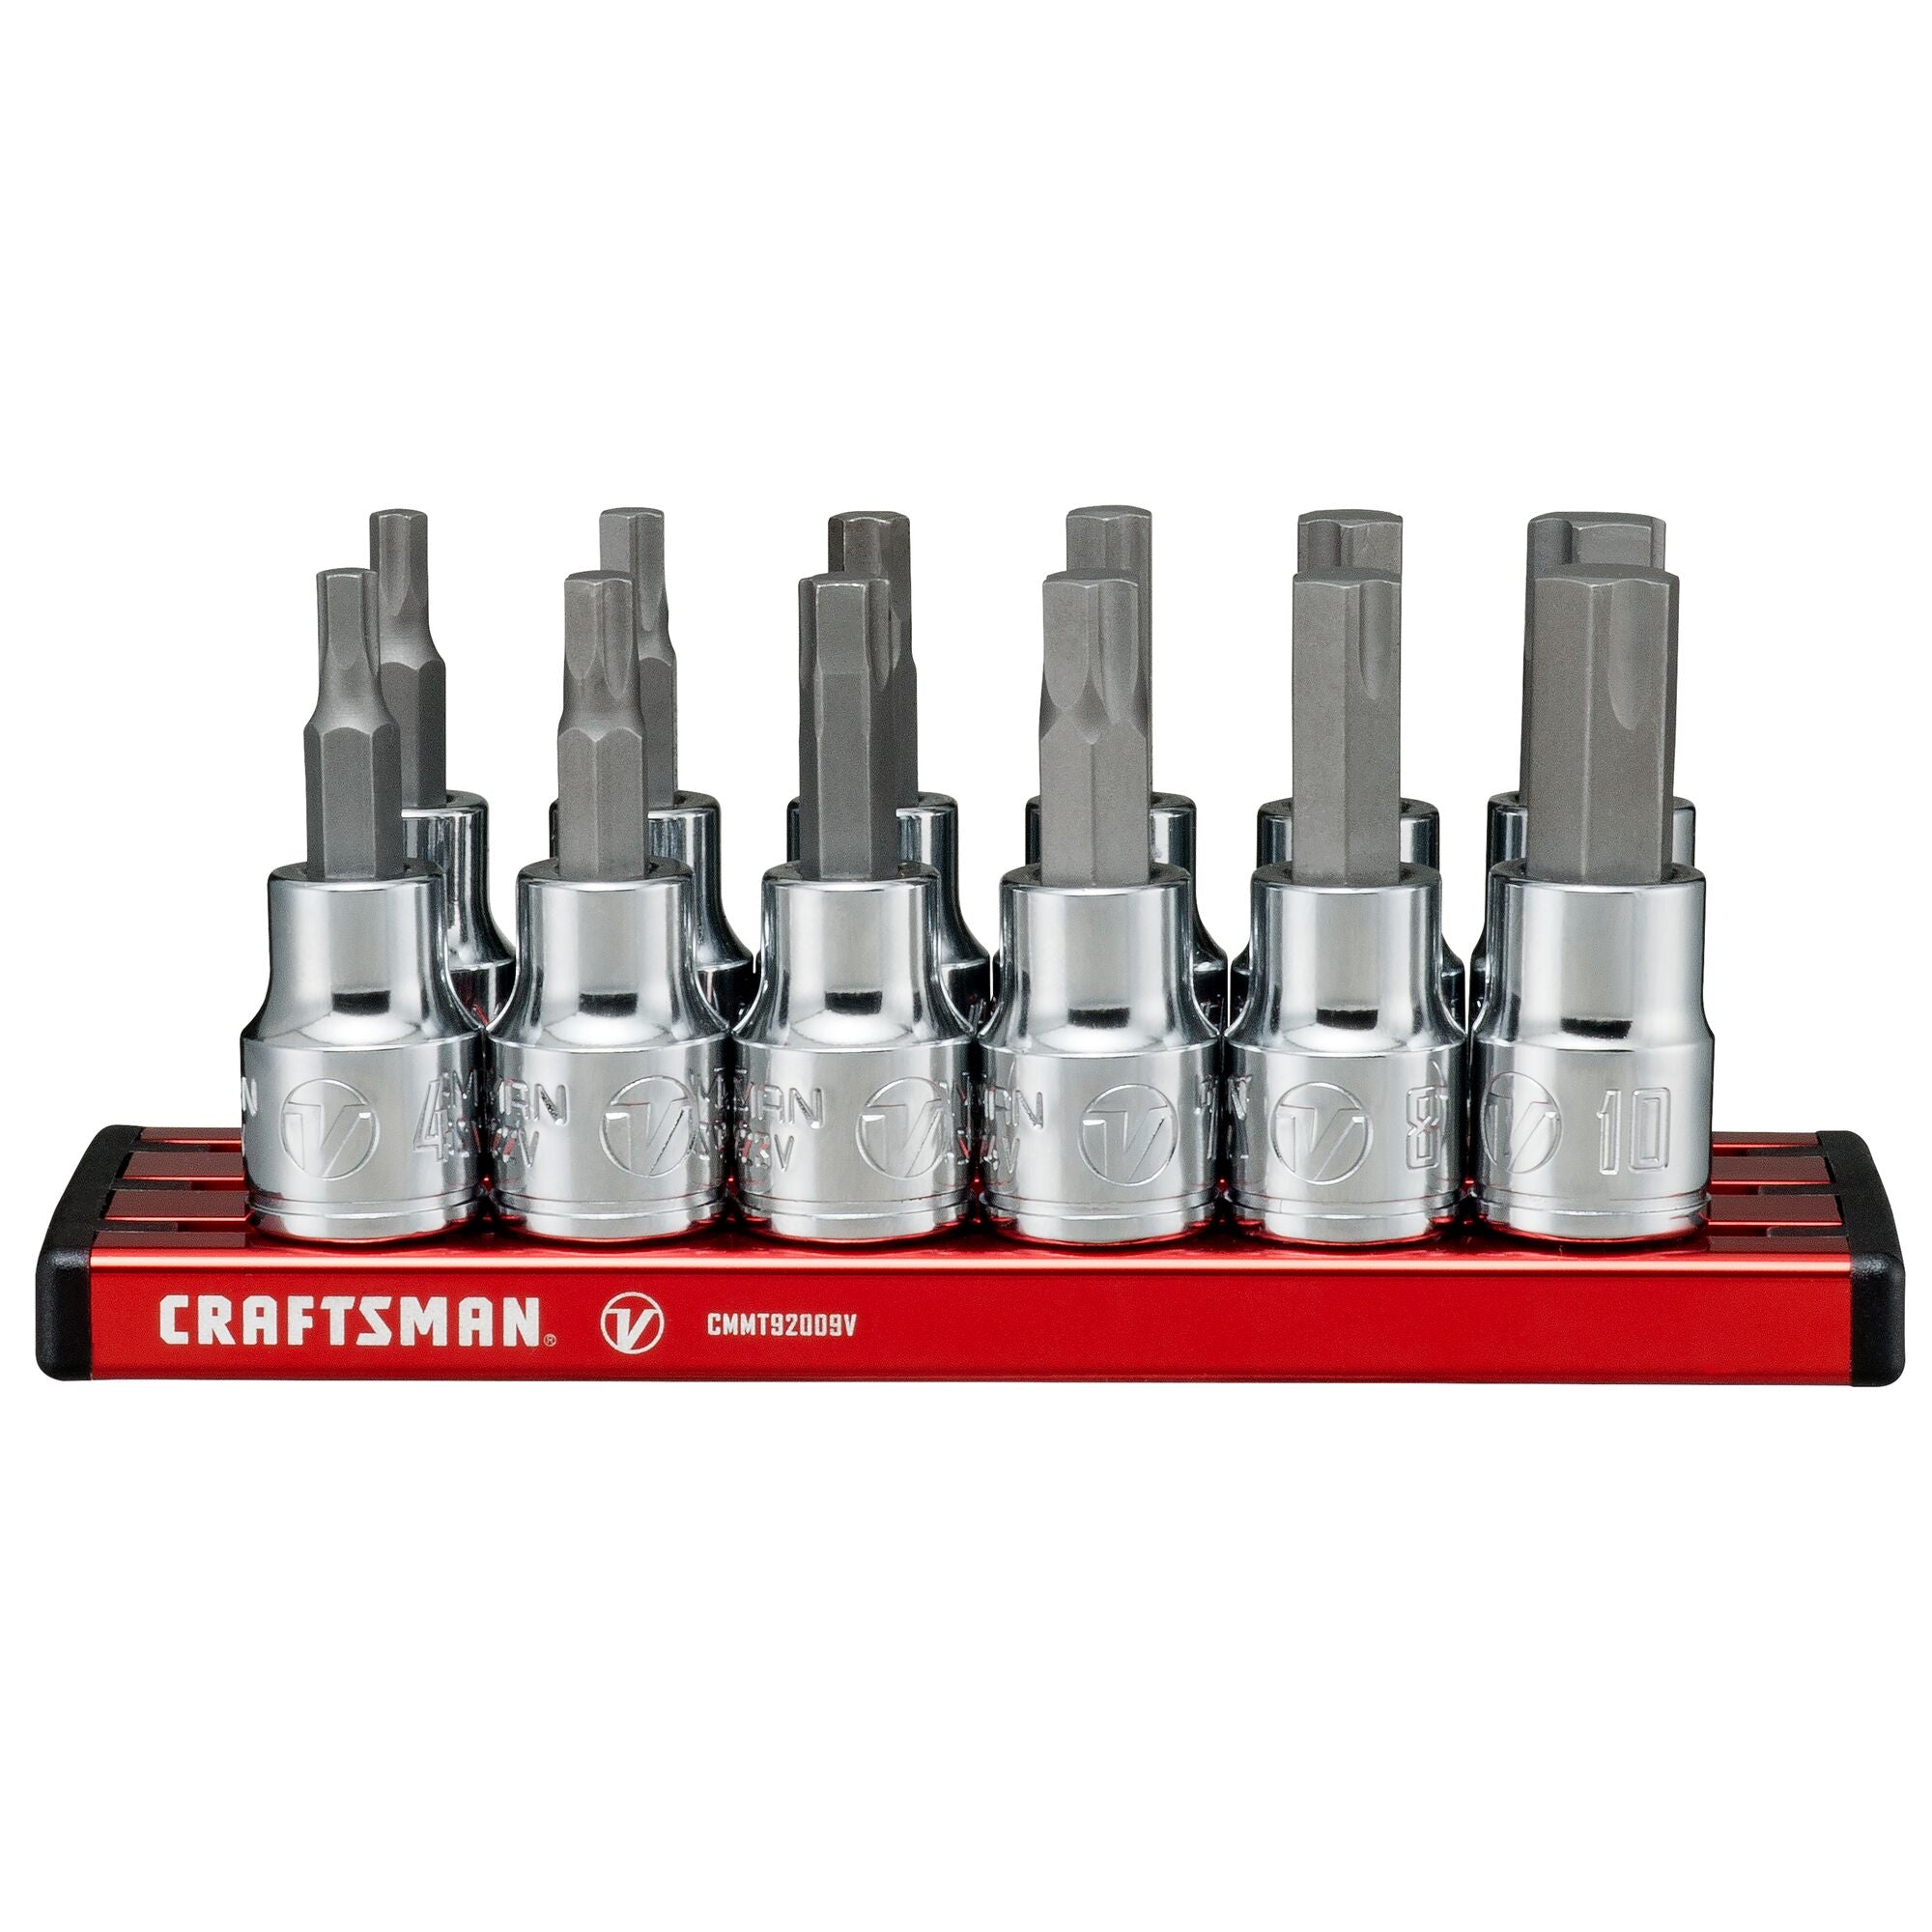 V-Series™ 3/8 in Drive X-Tract Technology Hex Bit Socket Set (12